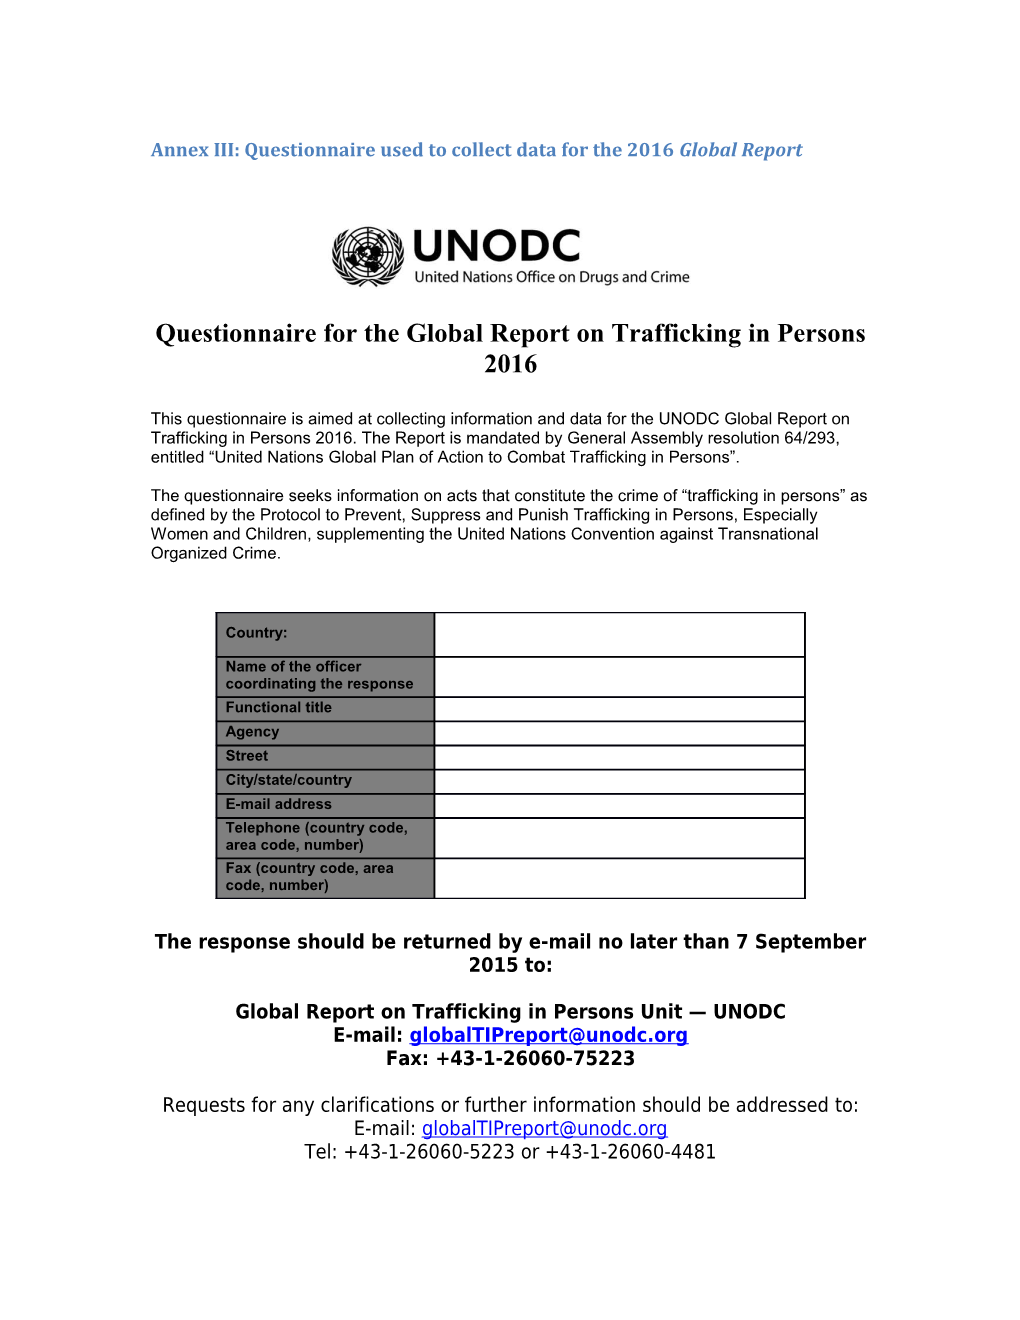 Annex III: Questionnaire Used to Collect Data for the 2016 Global Report